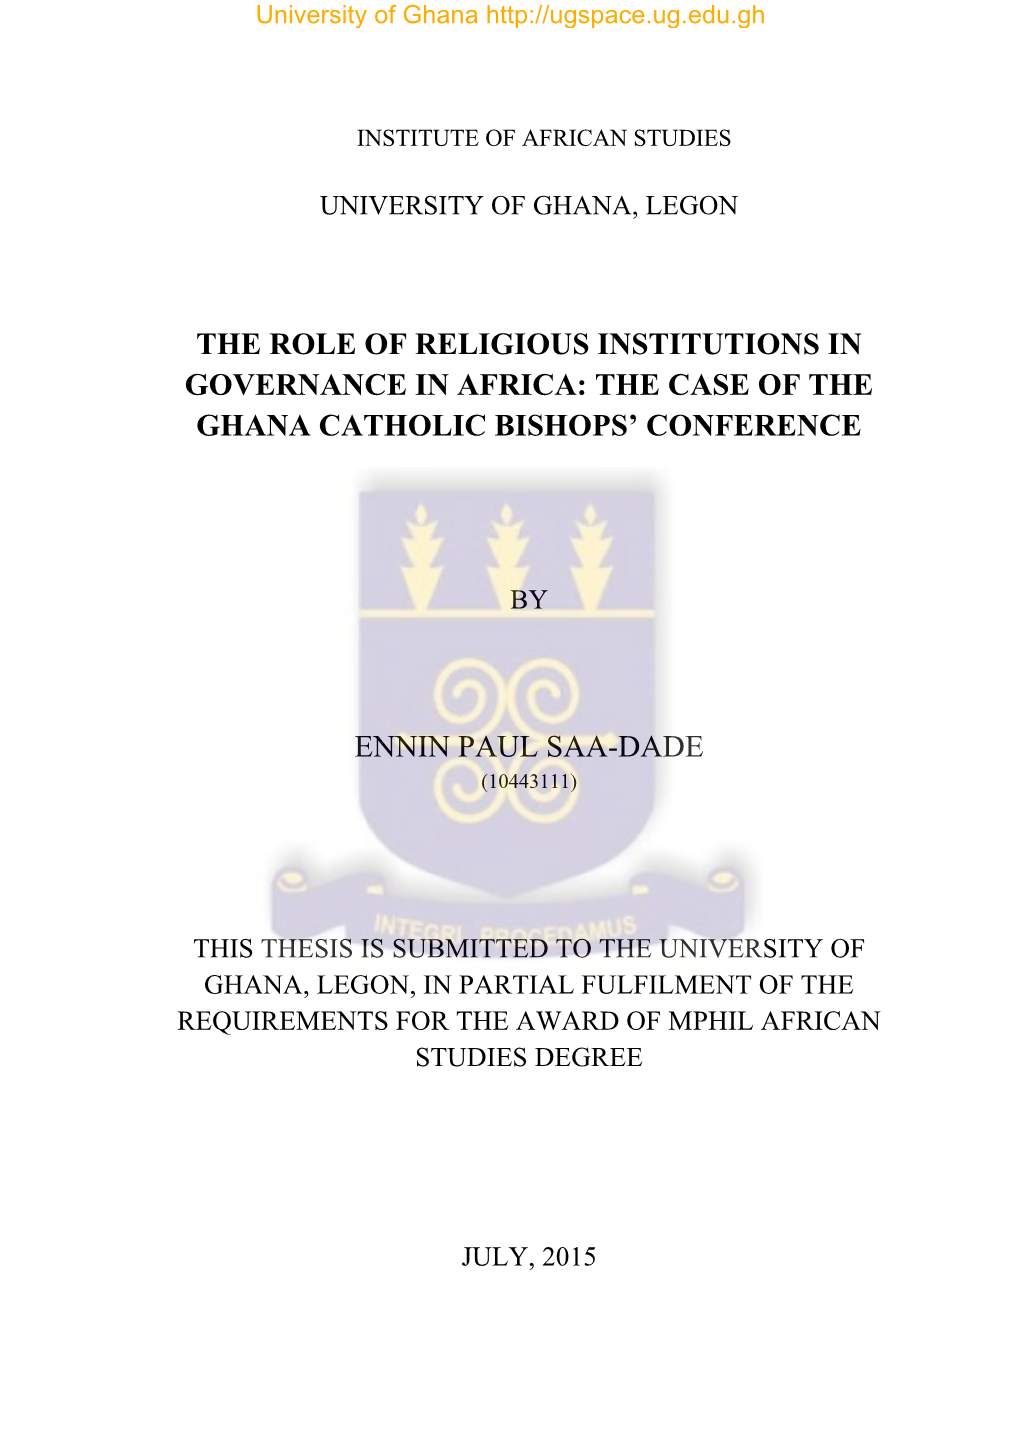 The Role of Religious Institutions in Governance in Africa: the Case of the Ghana Catholic Bishops’ Conference